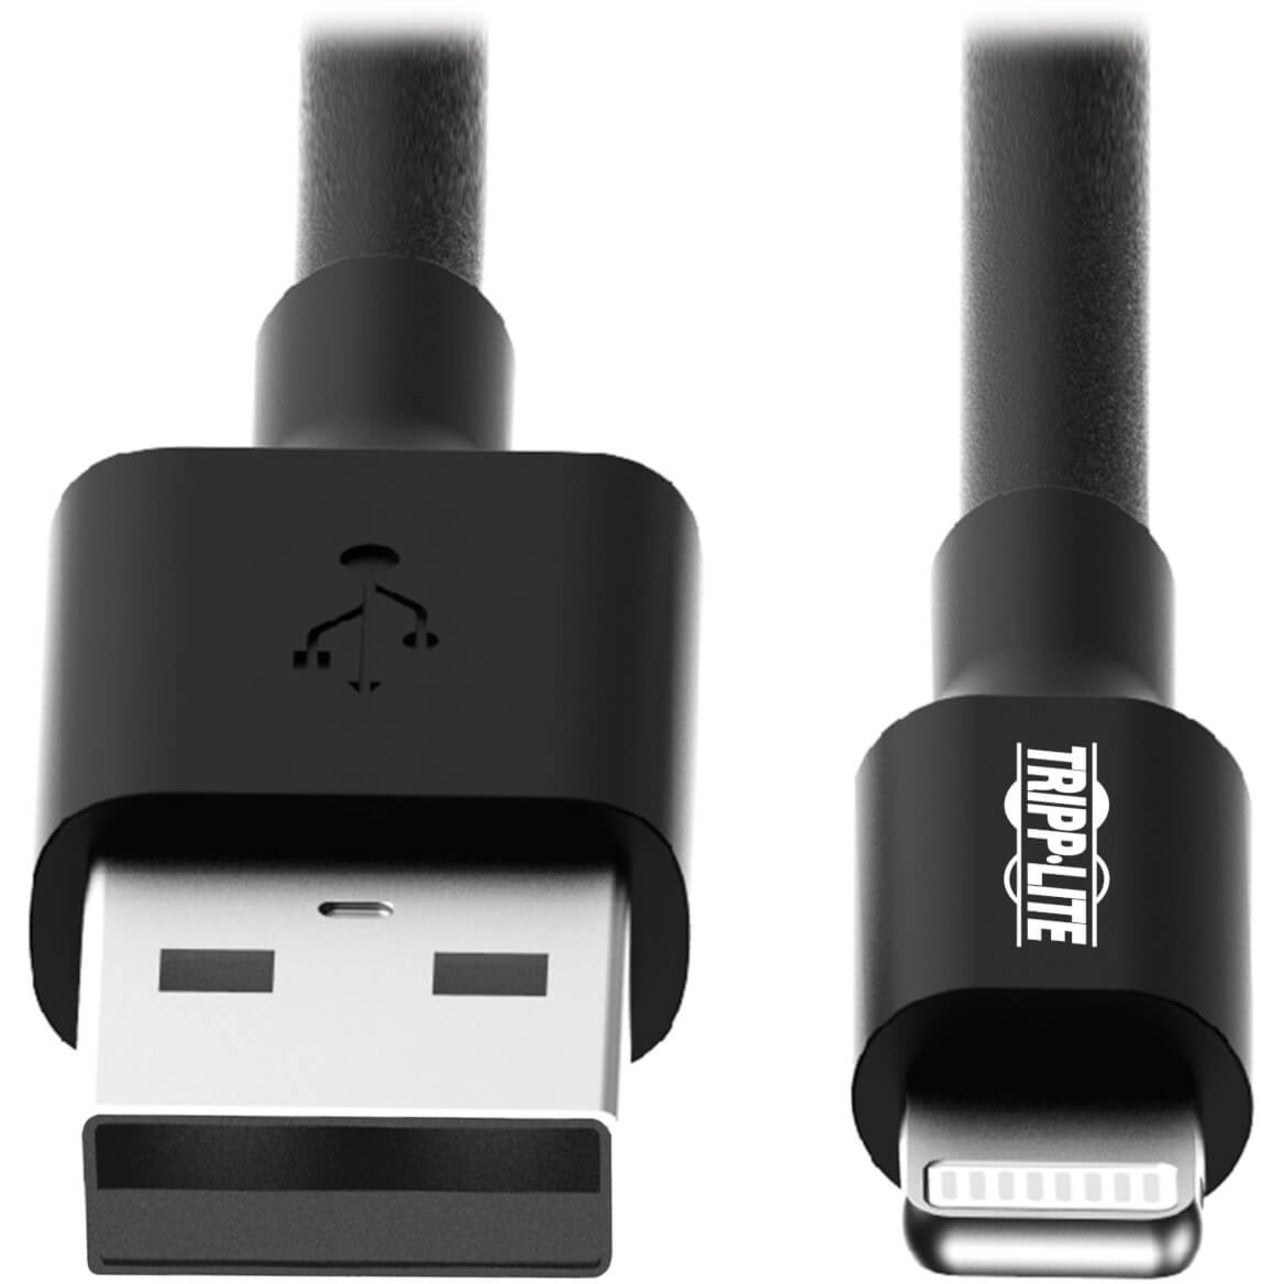 Tripp Lite M100-10N-BK USB Sync/Charge Cable with Lightning Connector - Black, 10-in